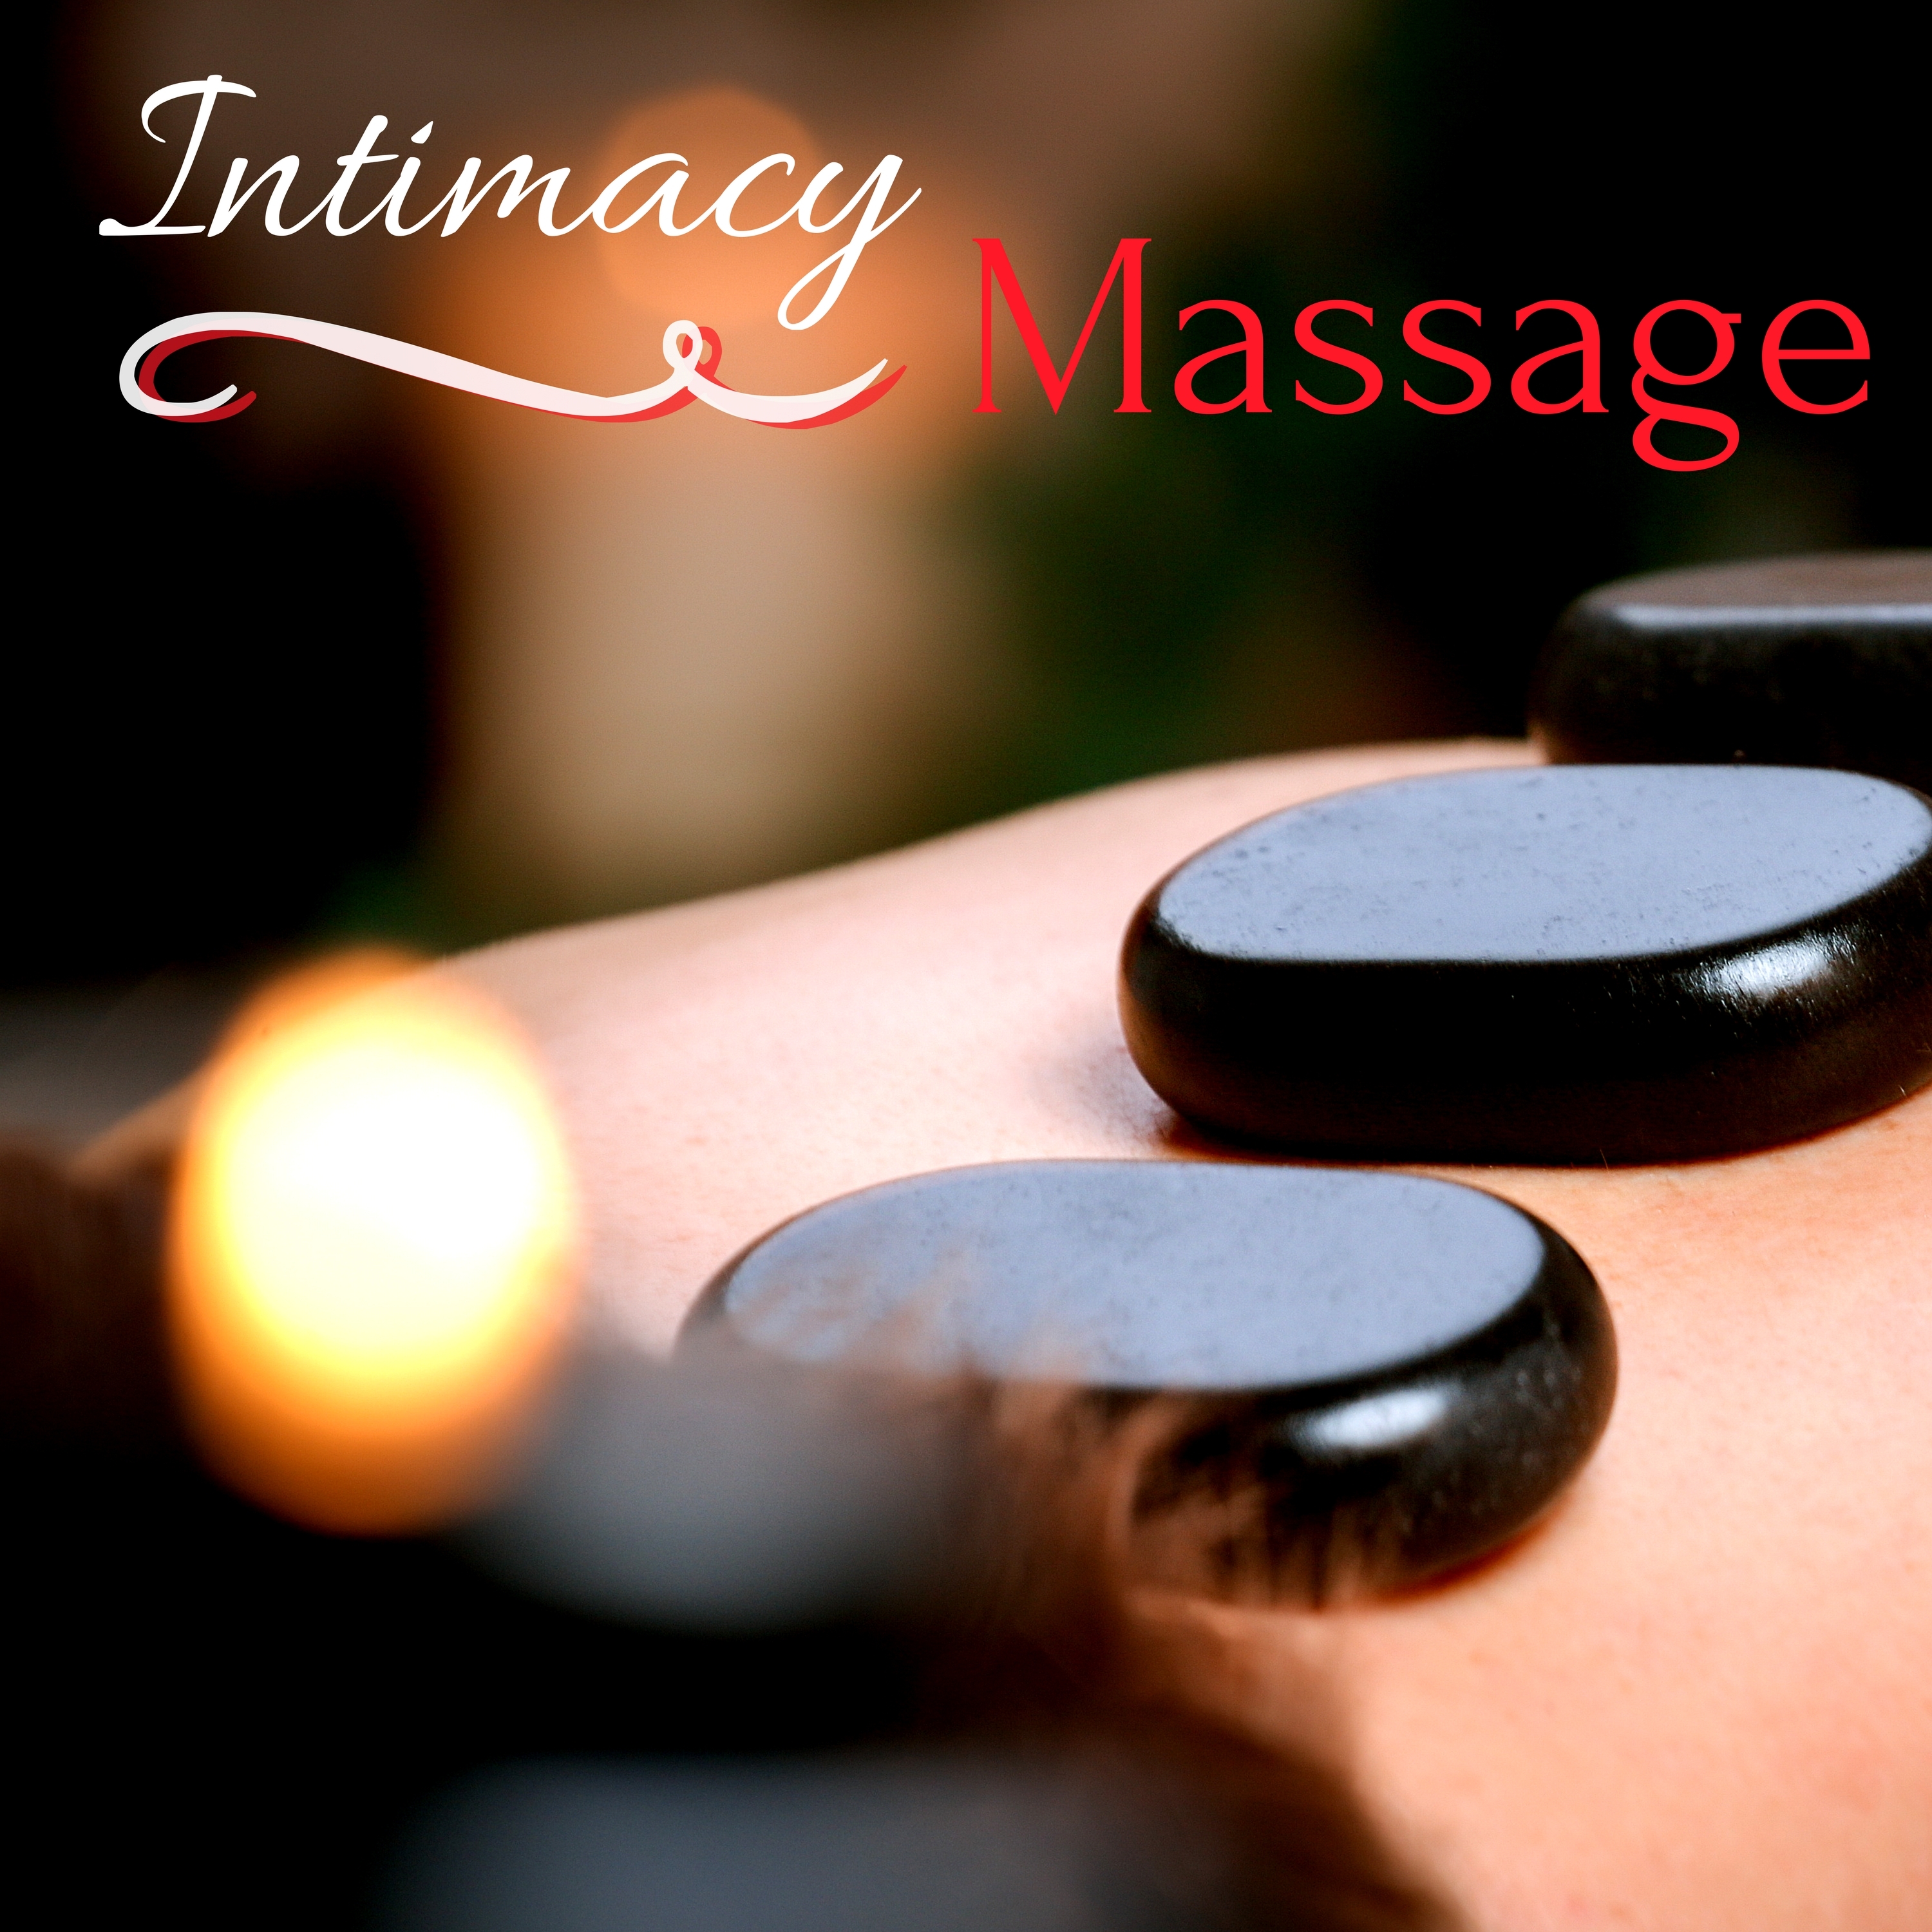 Intimacy Massage - Gentle Music for Relaxation Room, Ambient Atmosphere Songs